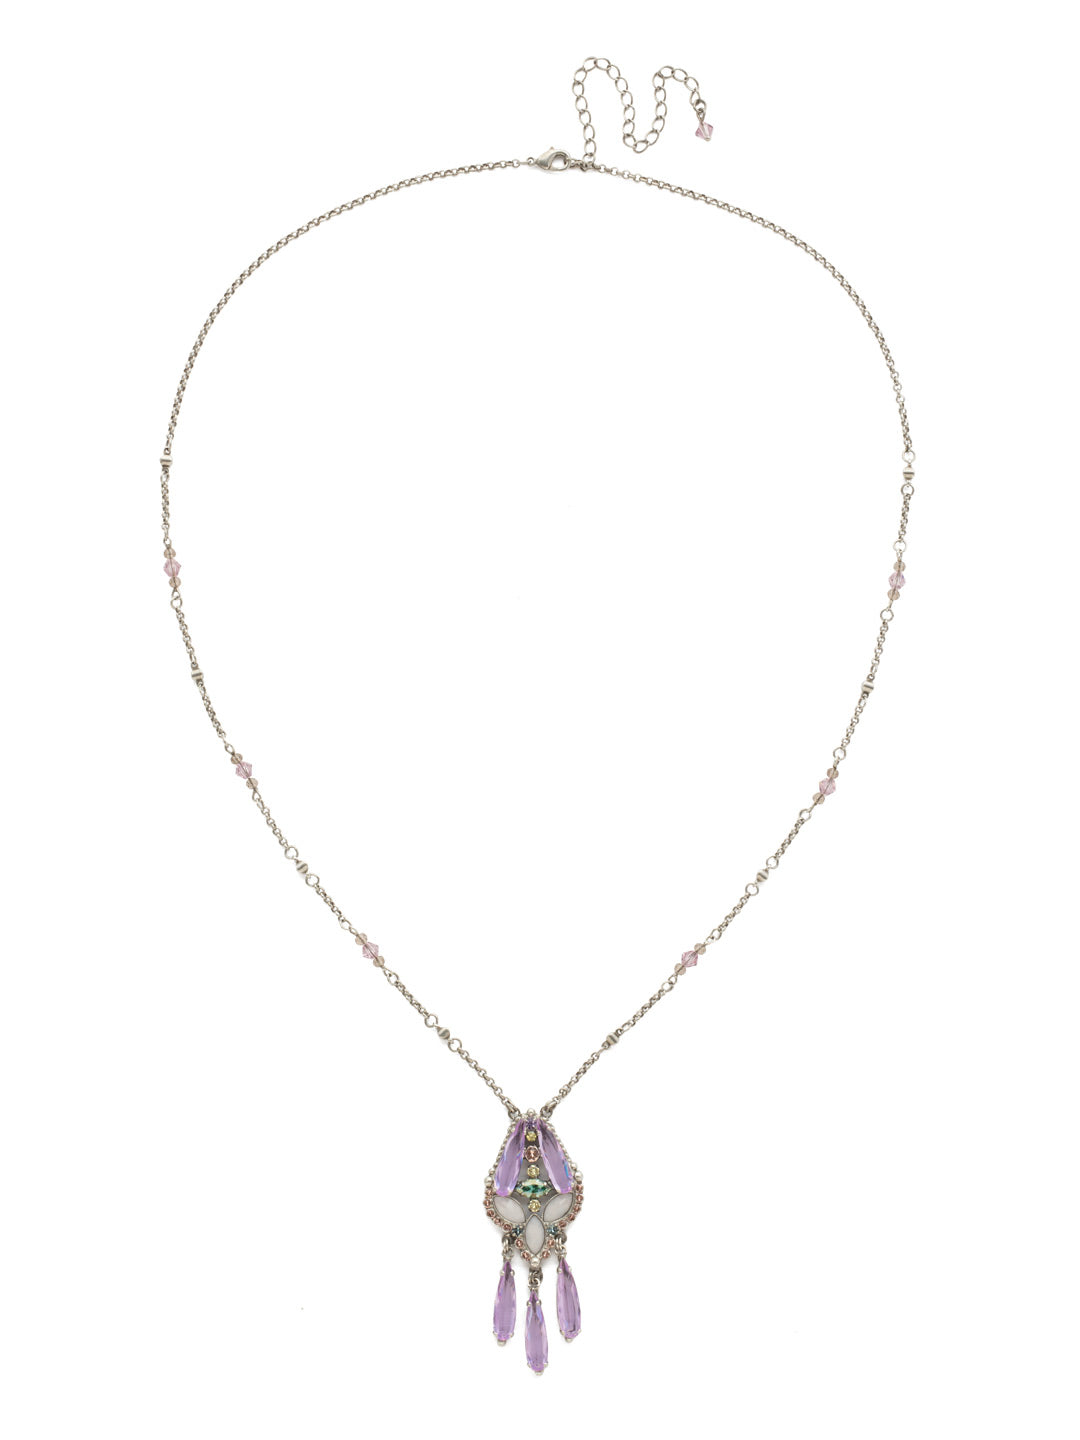 Brilliant Boho Pendant - NDN99ASLPA - A fun design with lots of movement perfect for everyday styling! A delicate chain with beaded details completes the bohemian vibe.